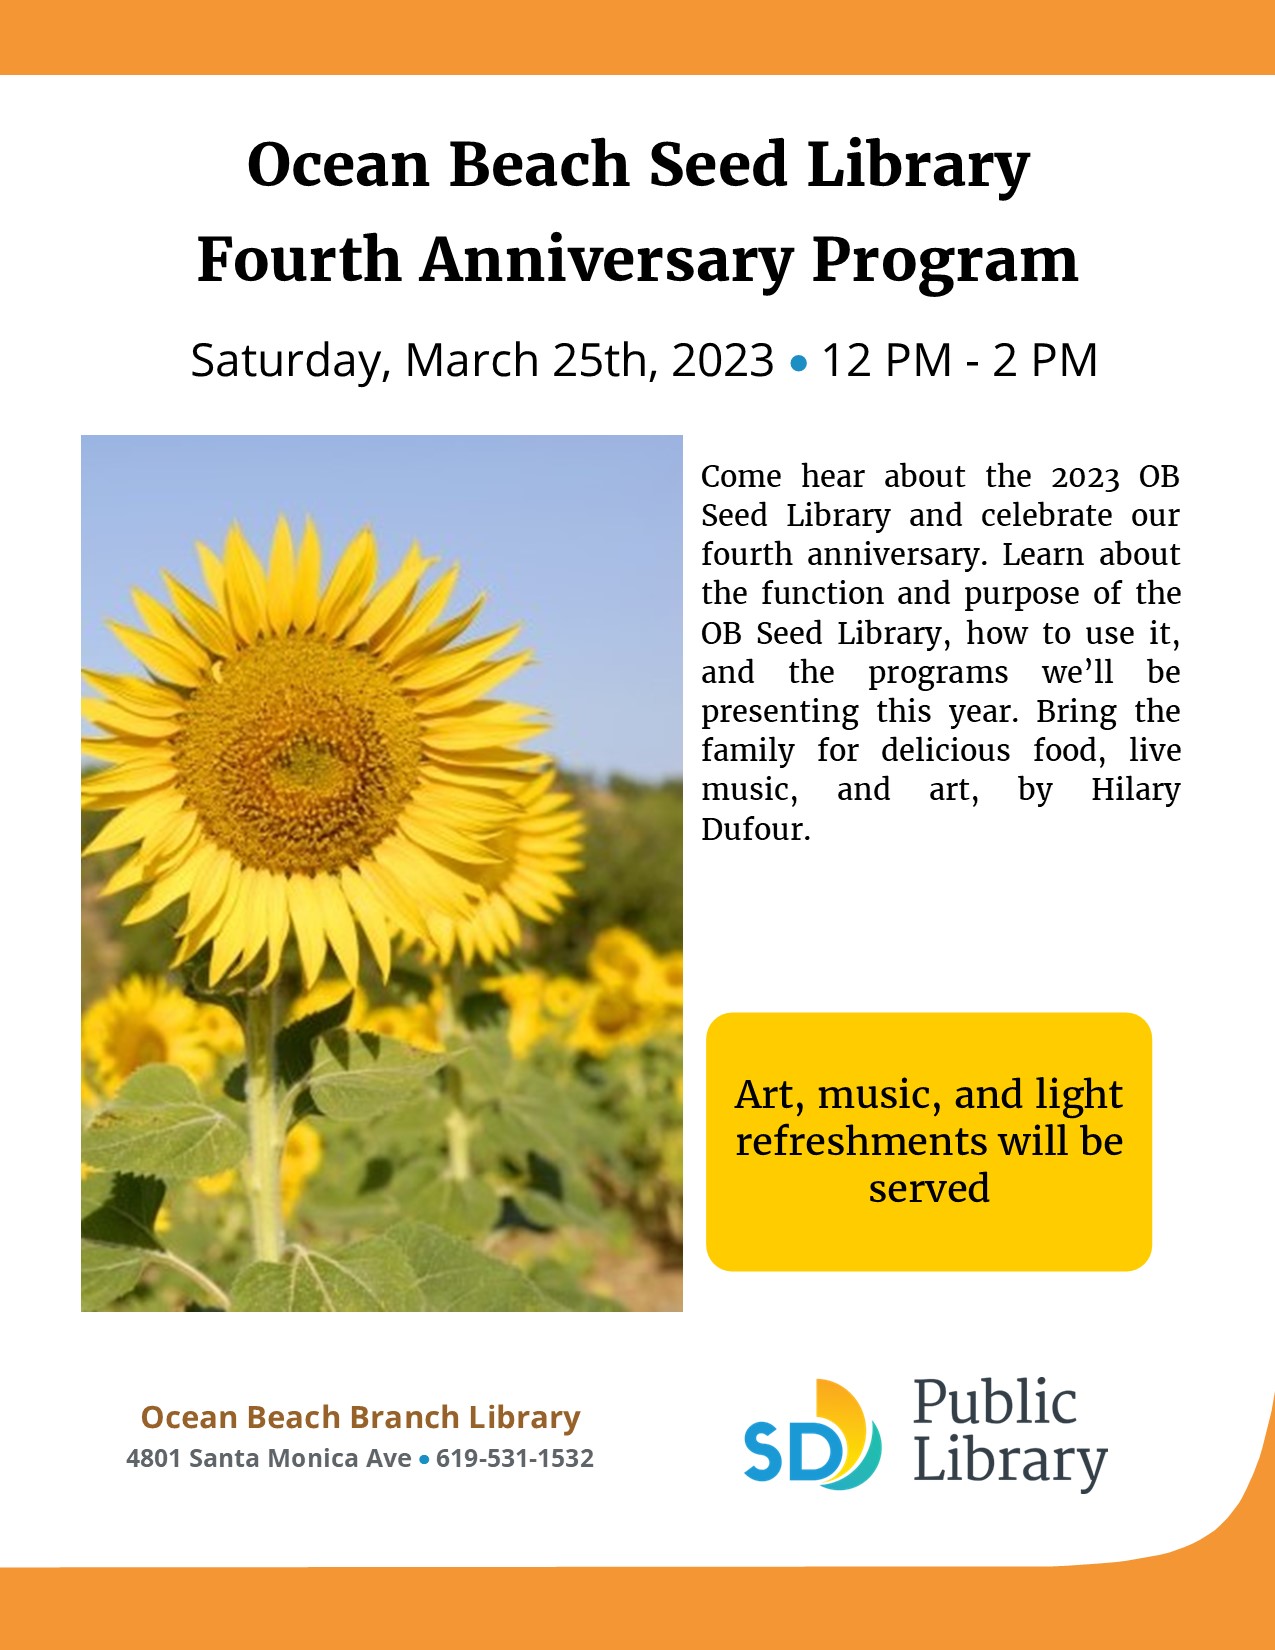 Picture of a field of bright yellow sunflowers with text about the seed library event.